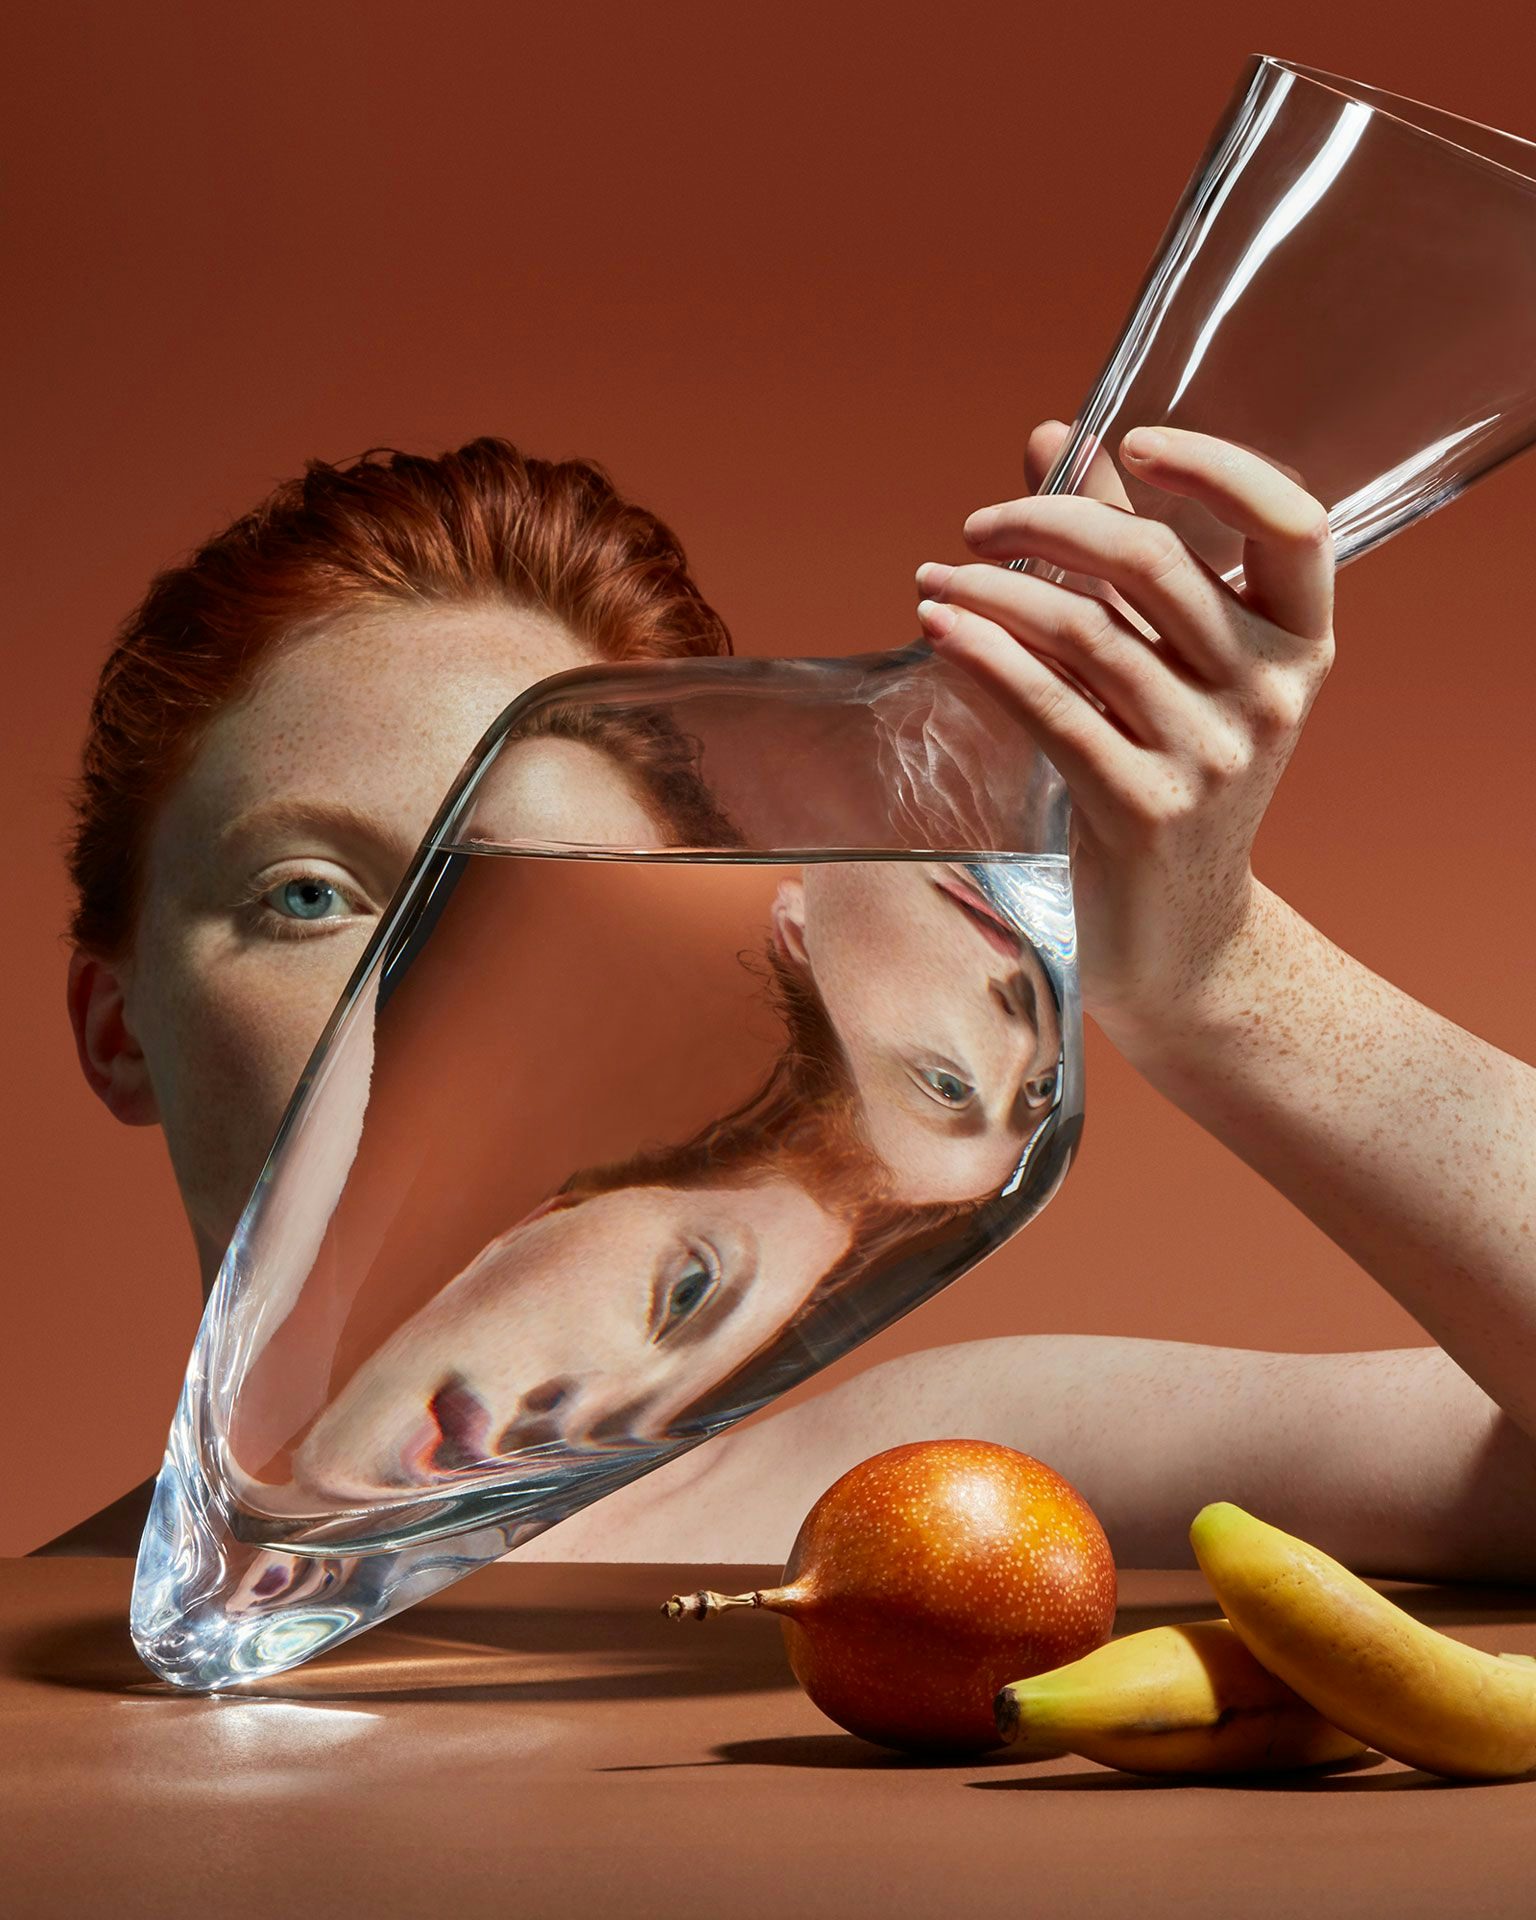 A woman's face refracted through a water-filled vase she holds.